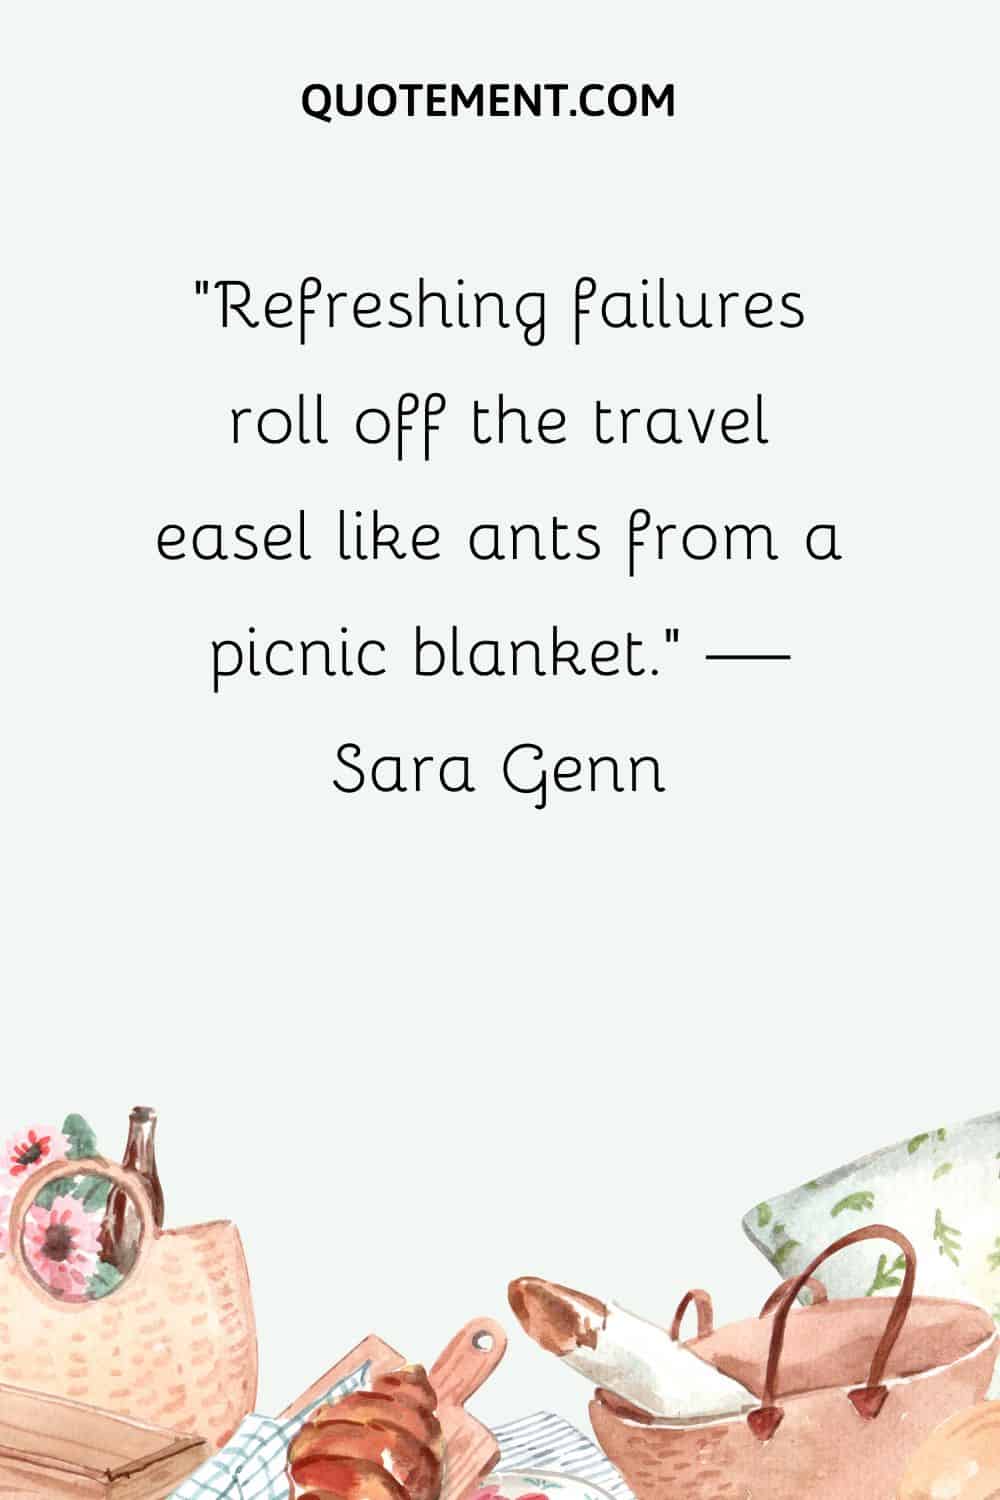 Refreshing failures roll off the travel easel like ants from a picnic blanket